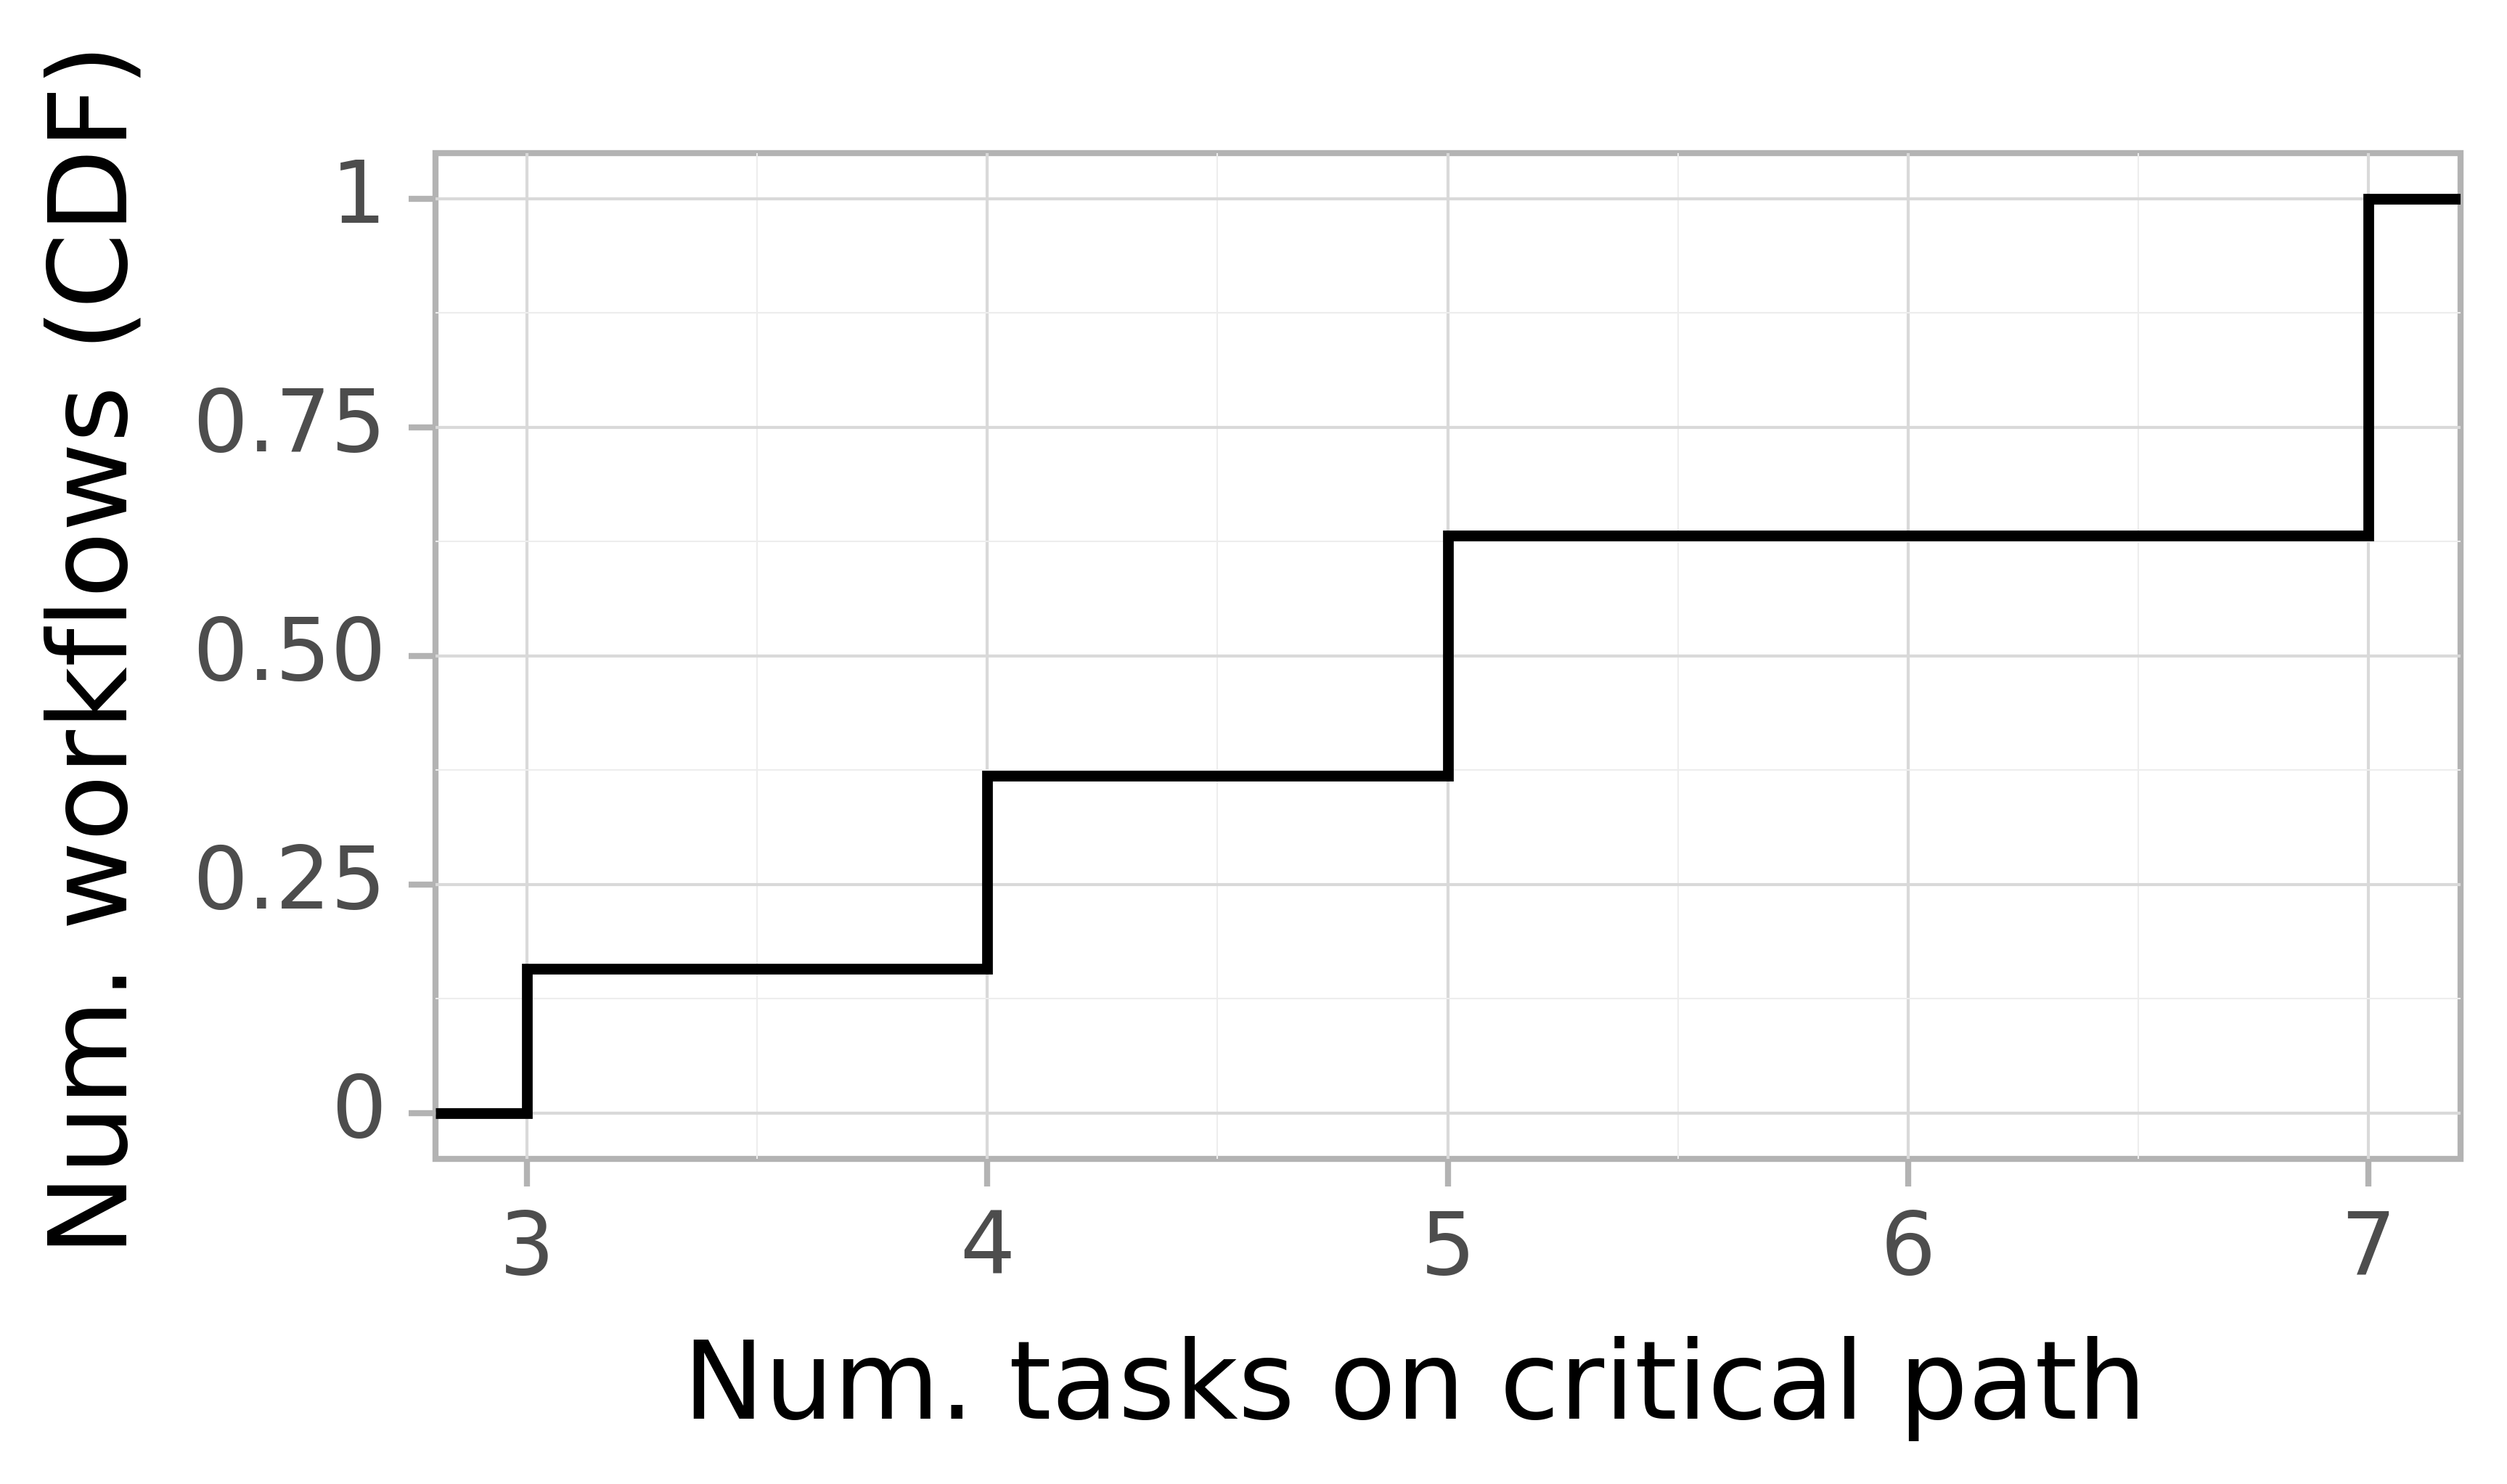 Job critical path task count graph for the Pegasus_P7 trace.